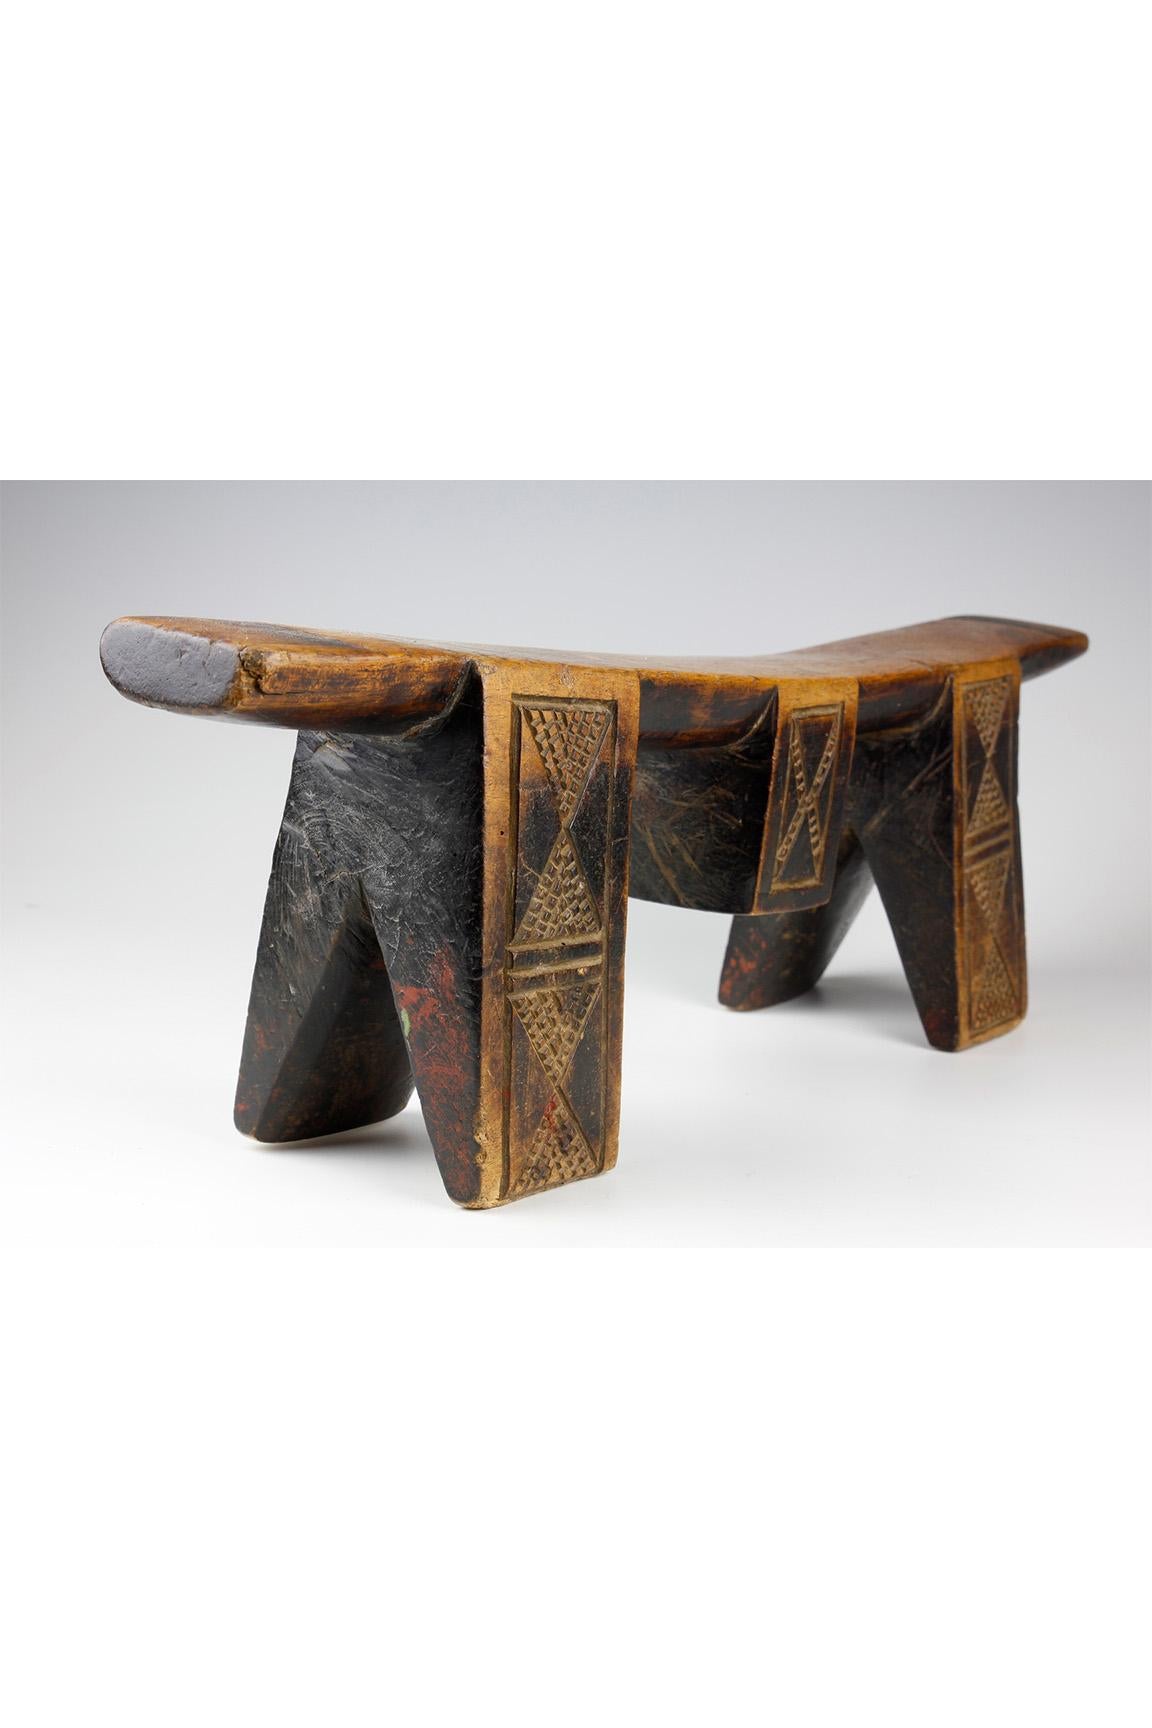 Carved Early Twentieth-Century South African Headrest For Sale